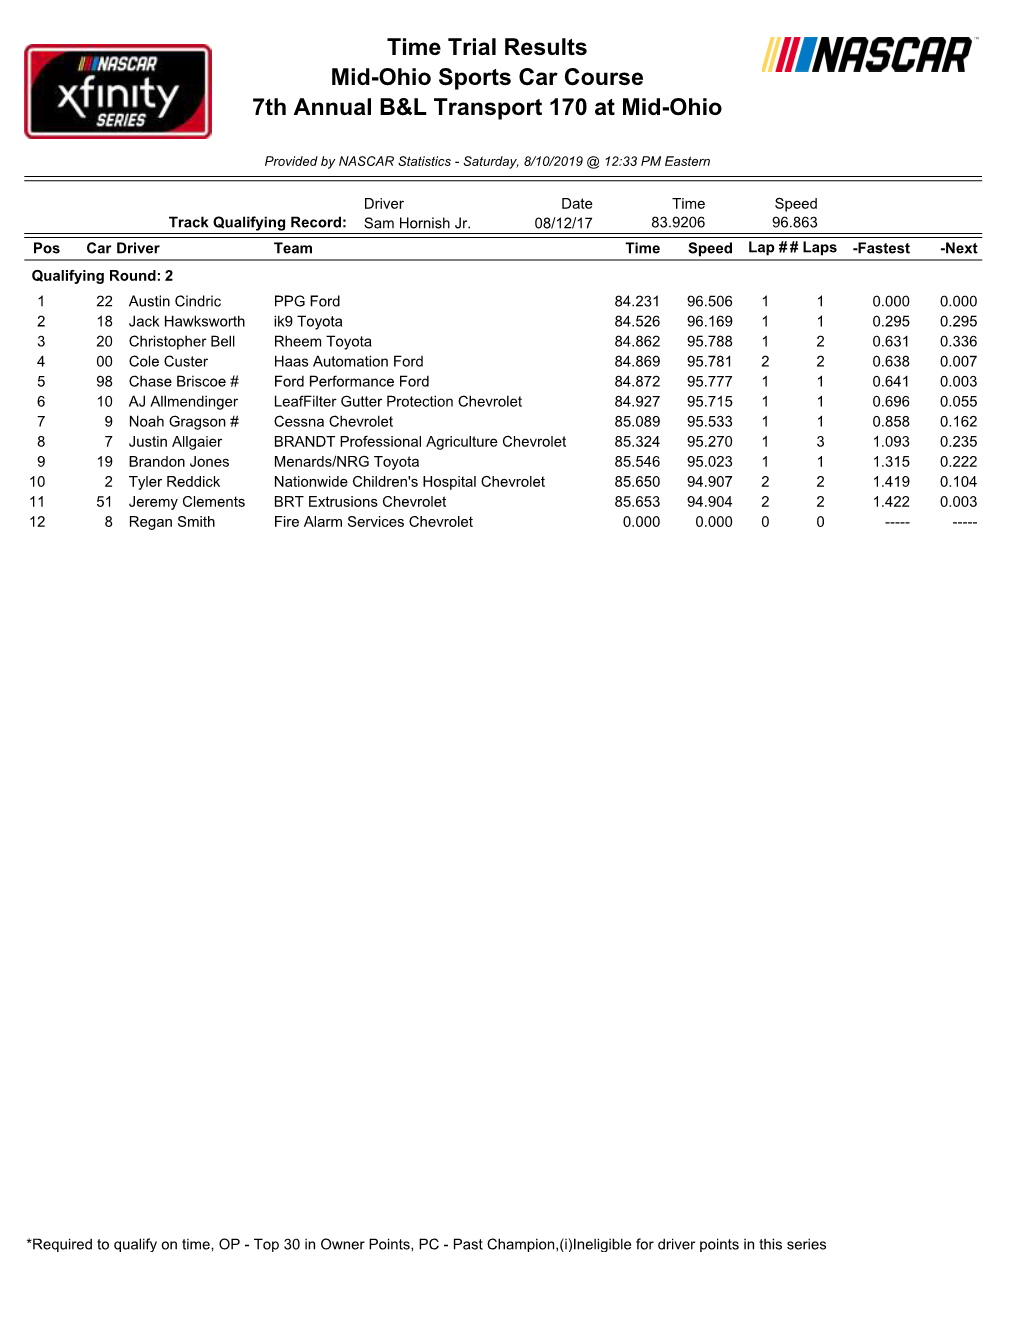 Time Trial Results Mid-Ohio Sports Car Course 7Th Annual B&L